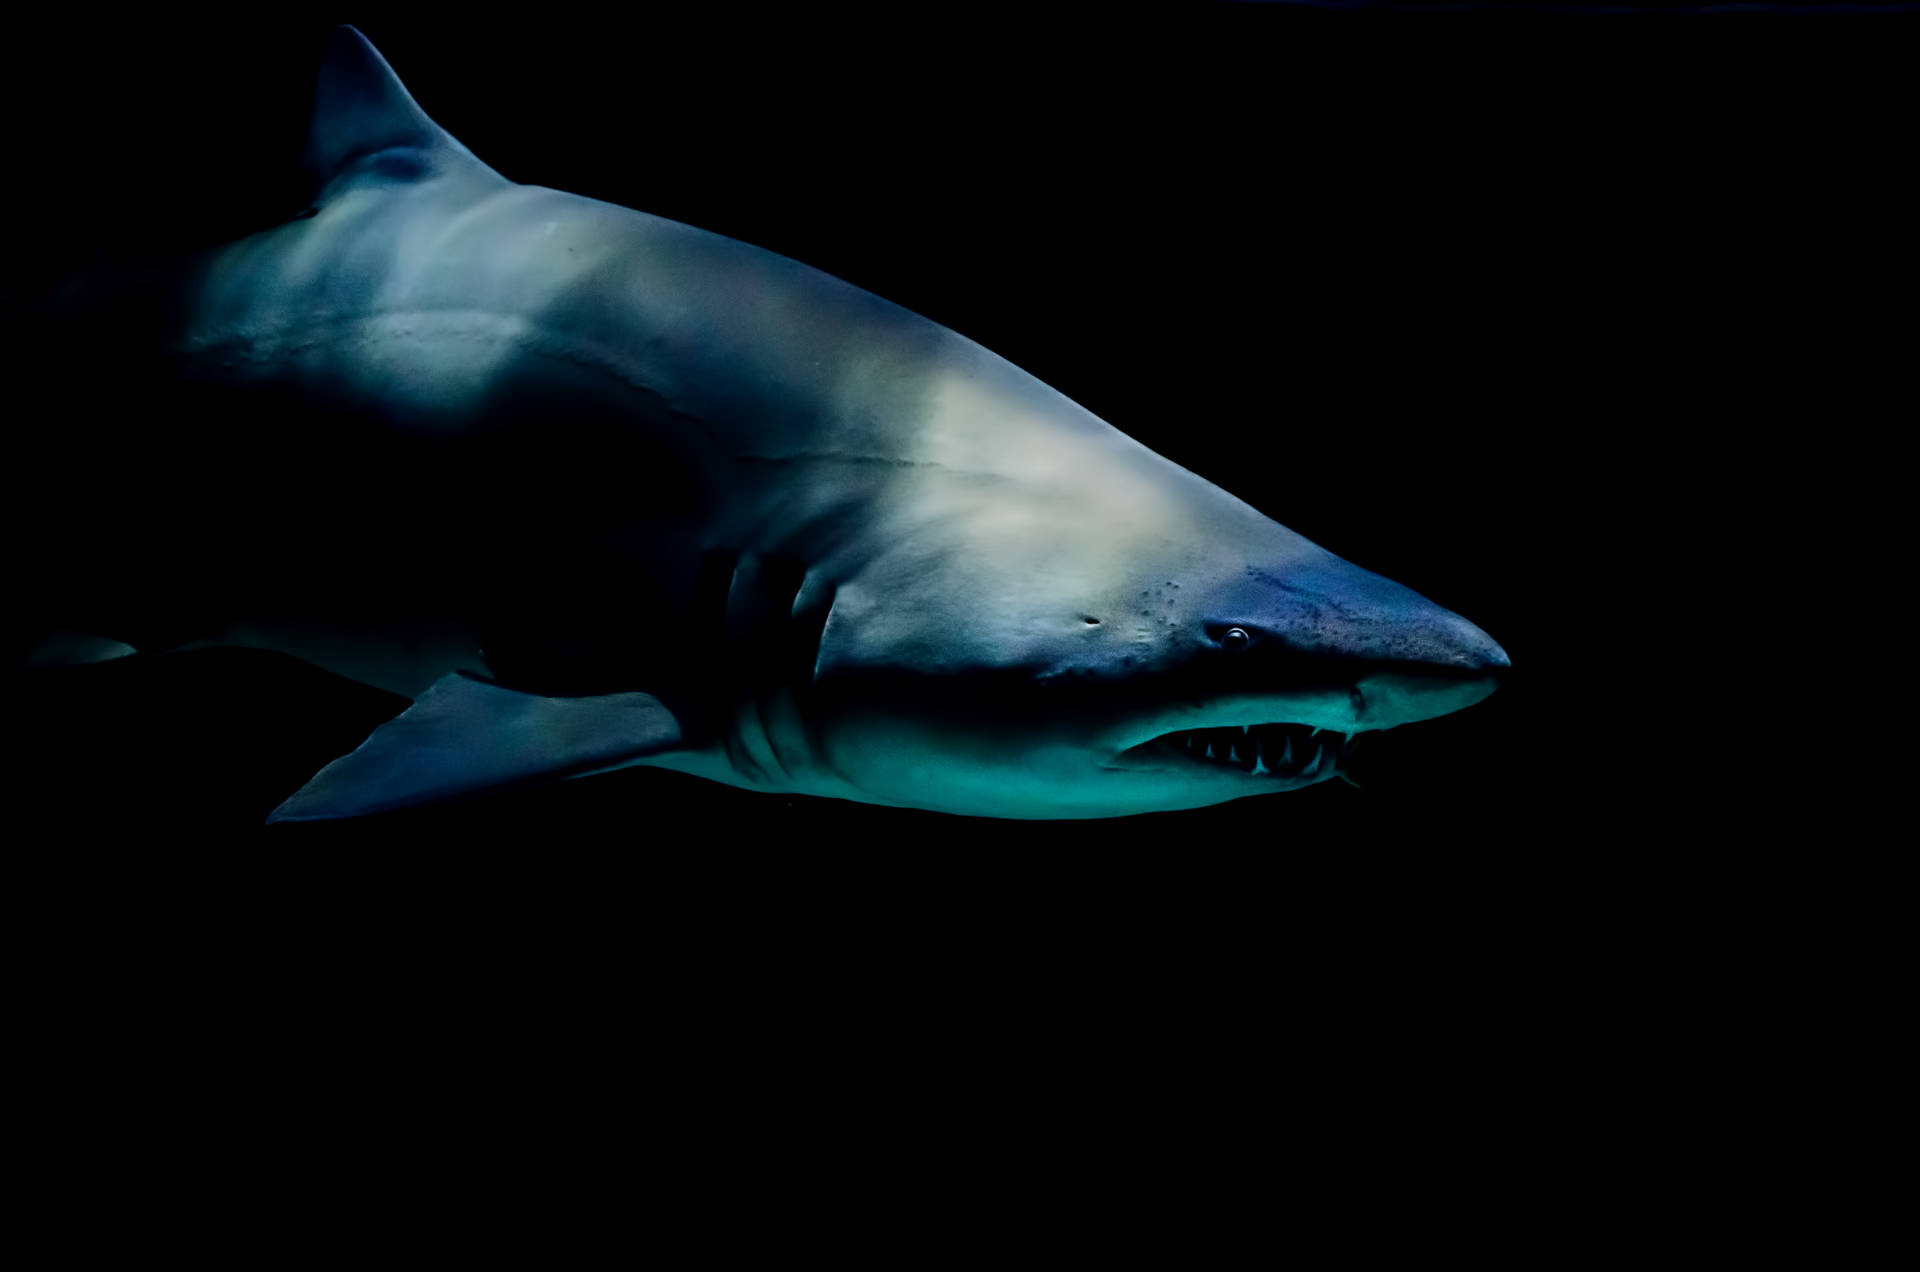 Shark 4928X3264 Wallpaper and Background Image